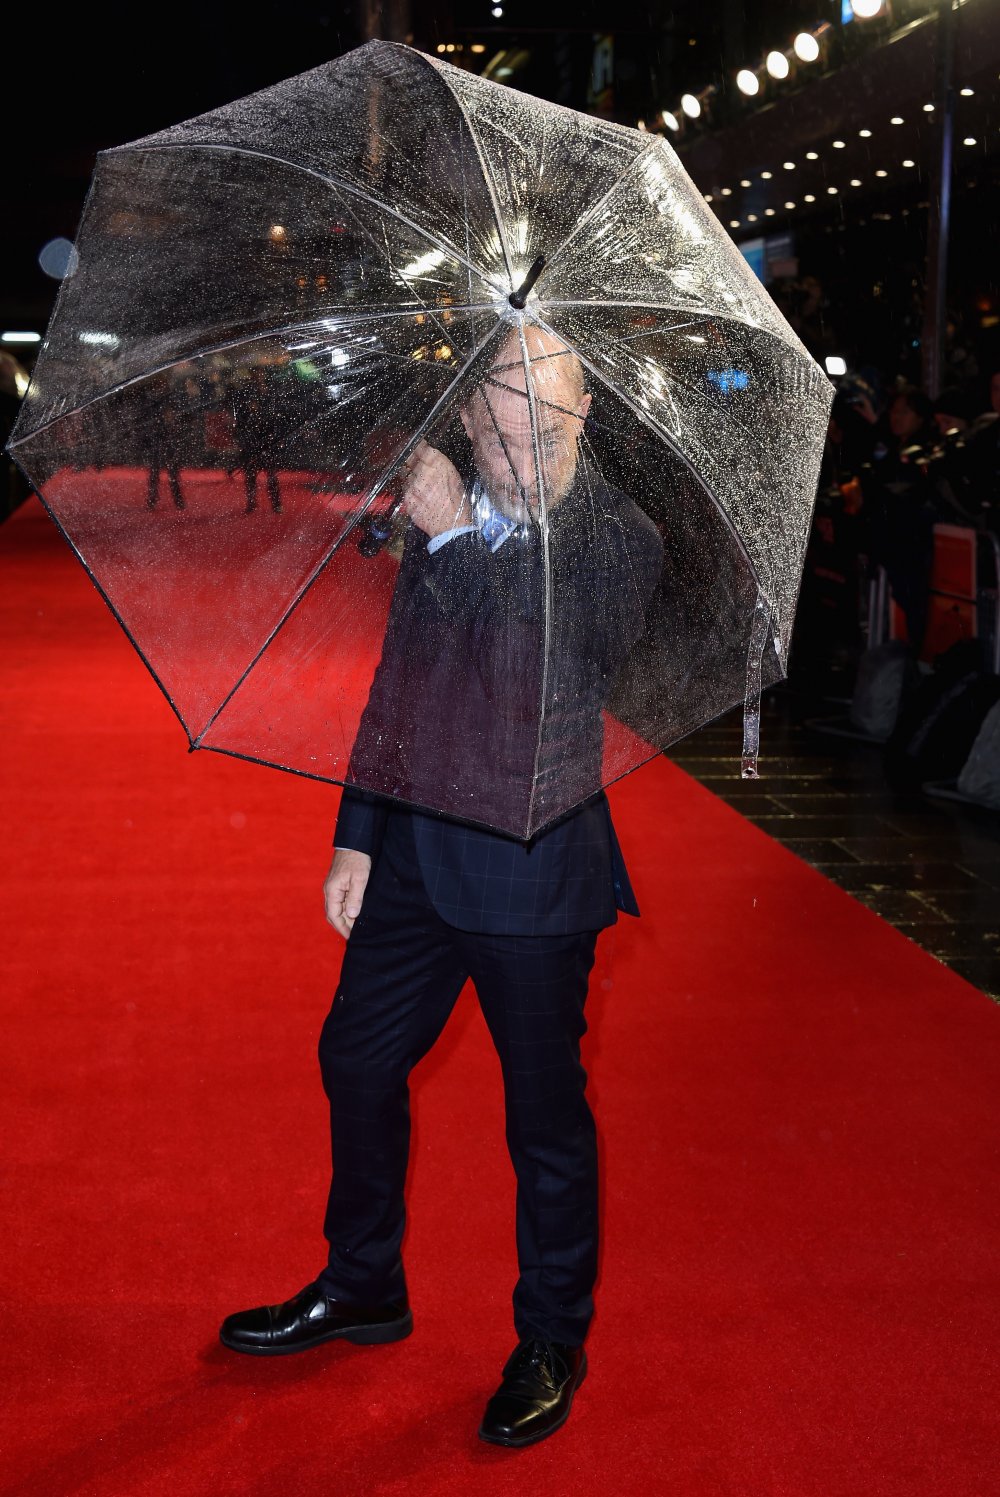 Actor J.K. Simmons has fun with his brolly in the run-up to the premiere of Whiplash, one of the undoubted buzz films of the Festival